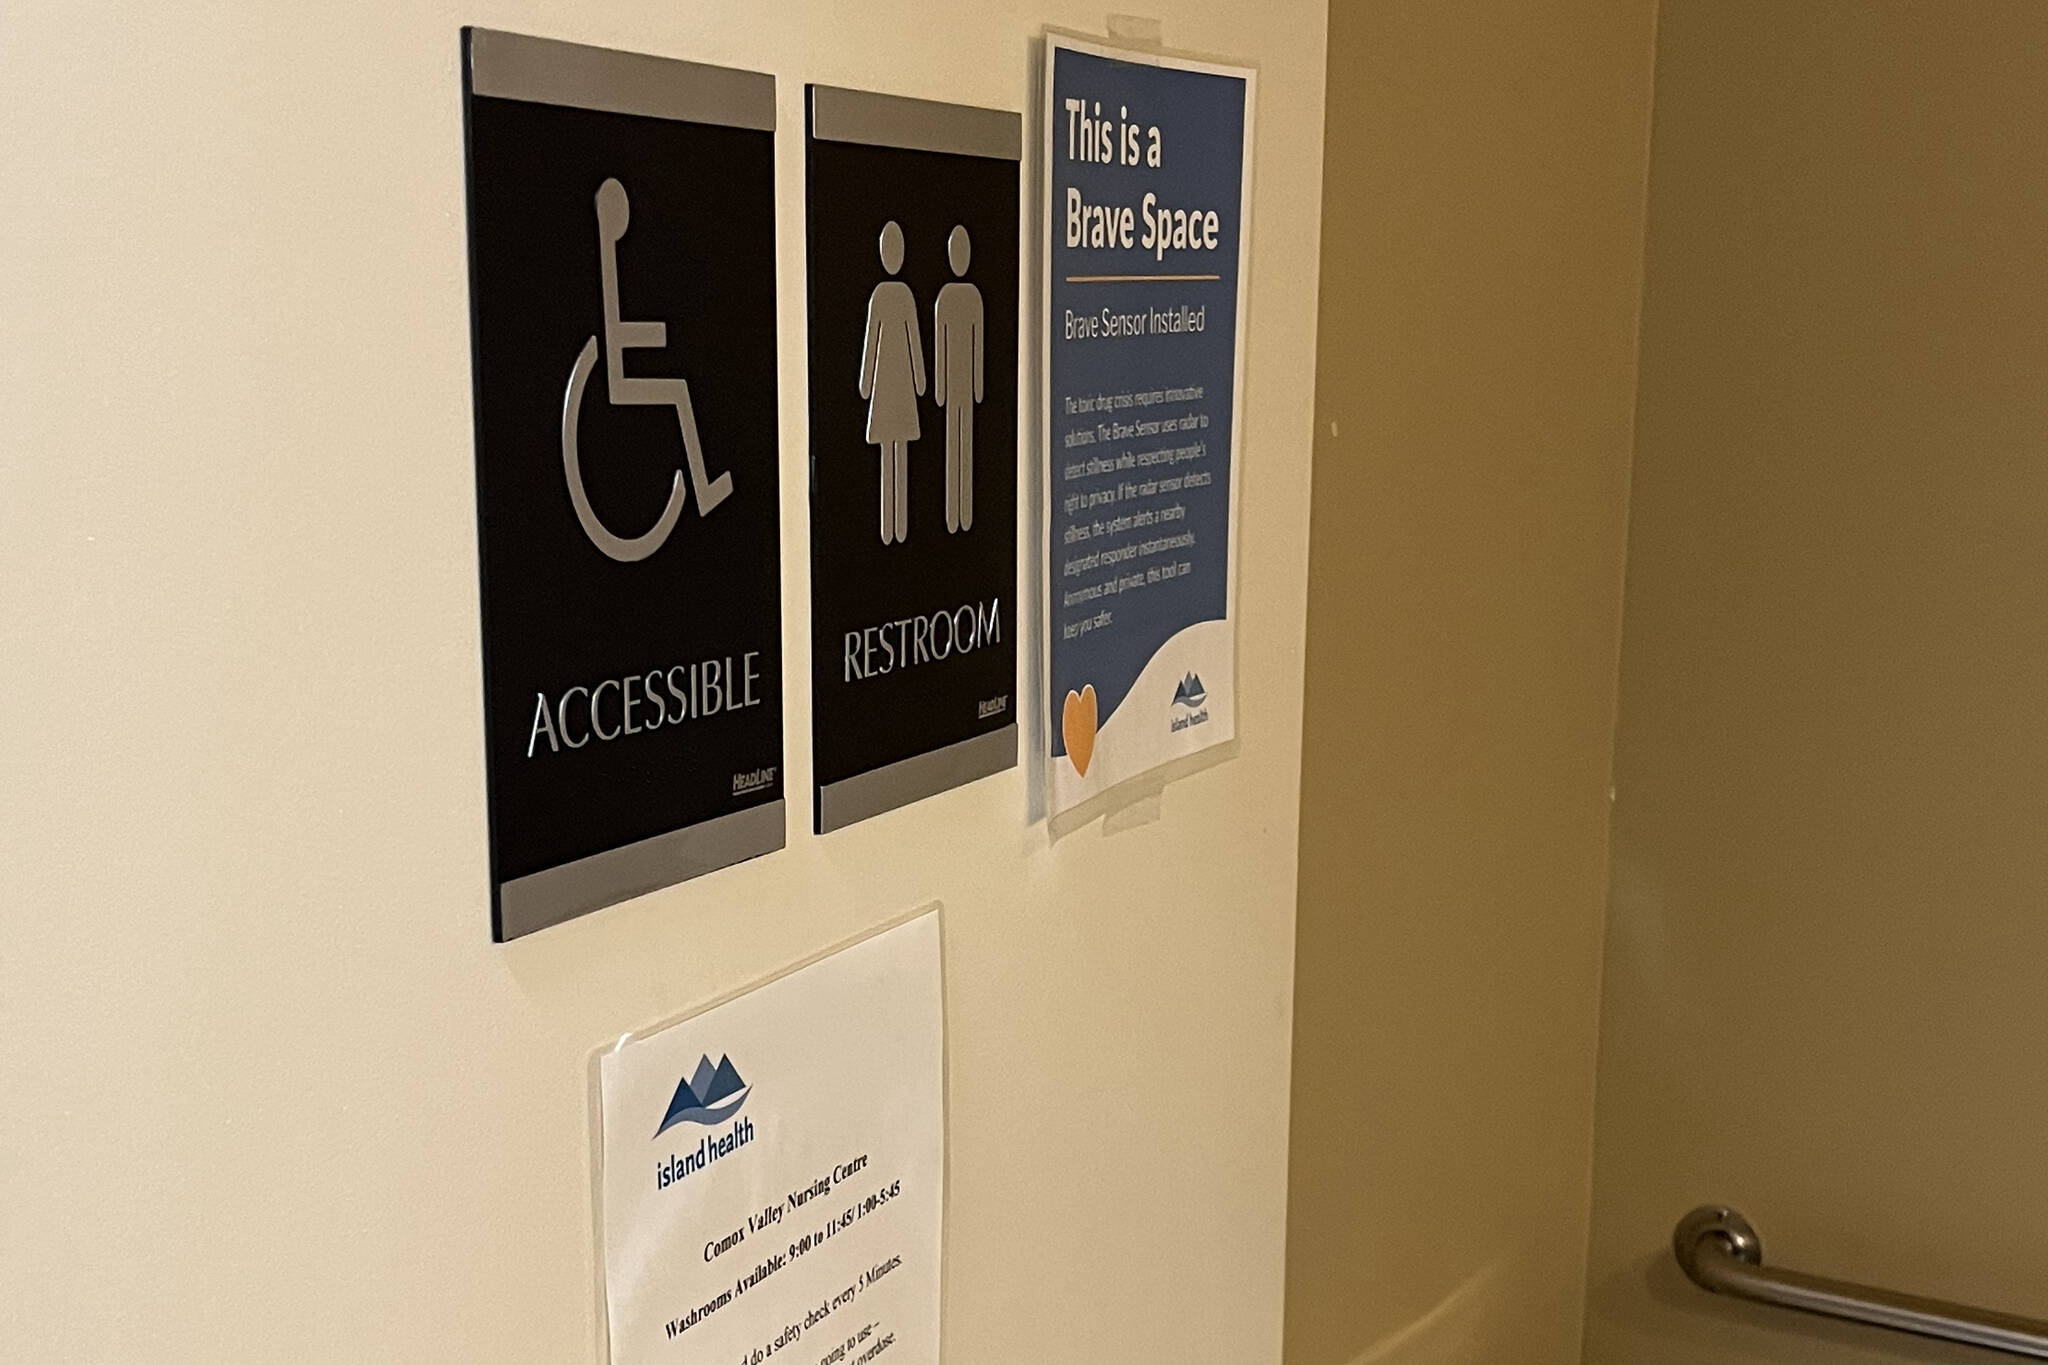 Island Health demonstrated the technology at the Comox Valley Nursing Centre in Courtenay March 15 as part of a trial in a group of washrooms identified high-risk spaces for drug poisonings. Photo by Erin Haluschak